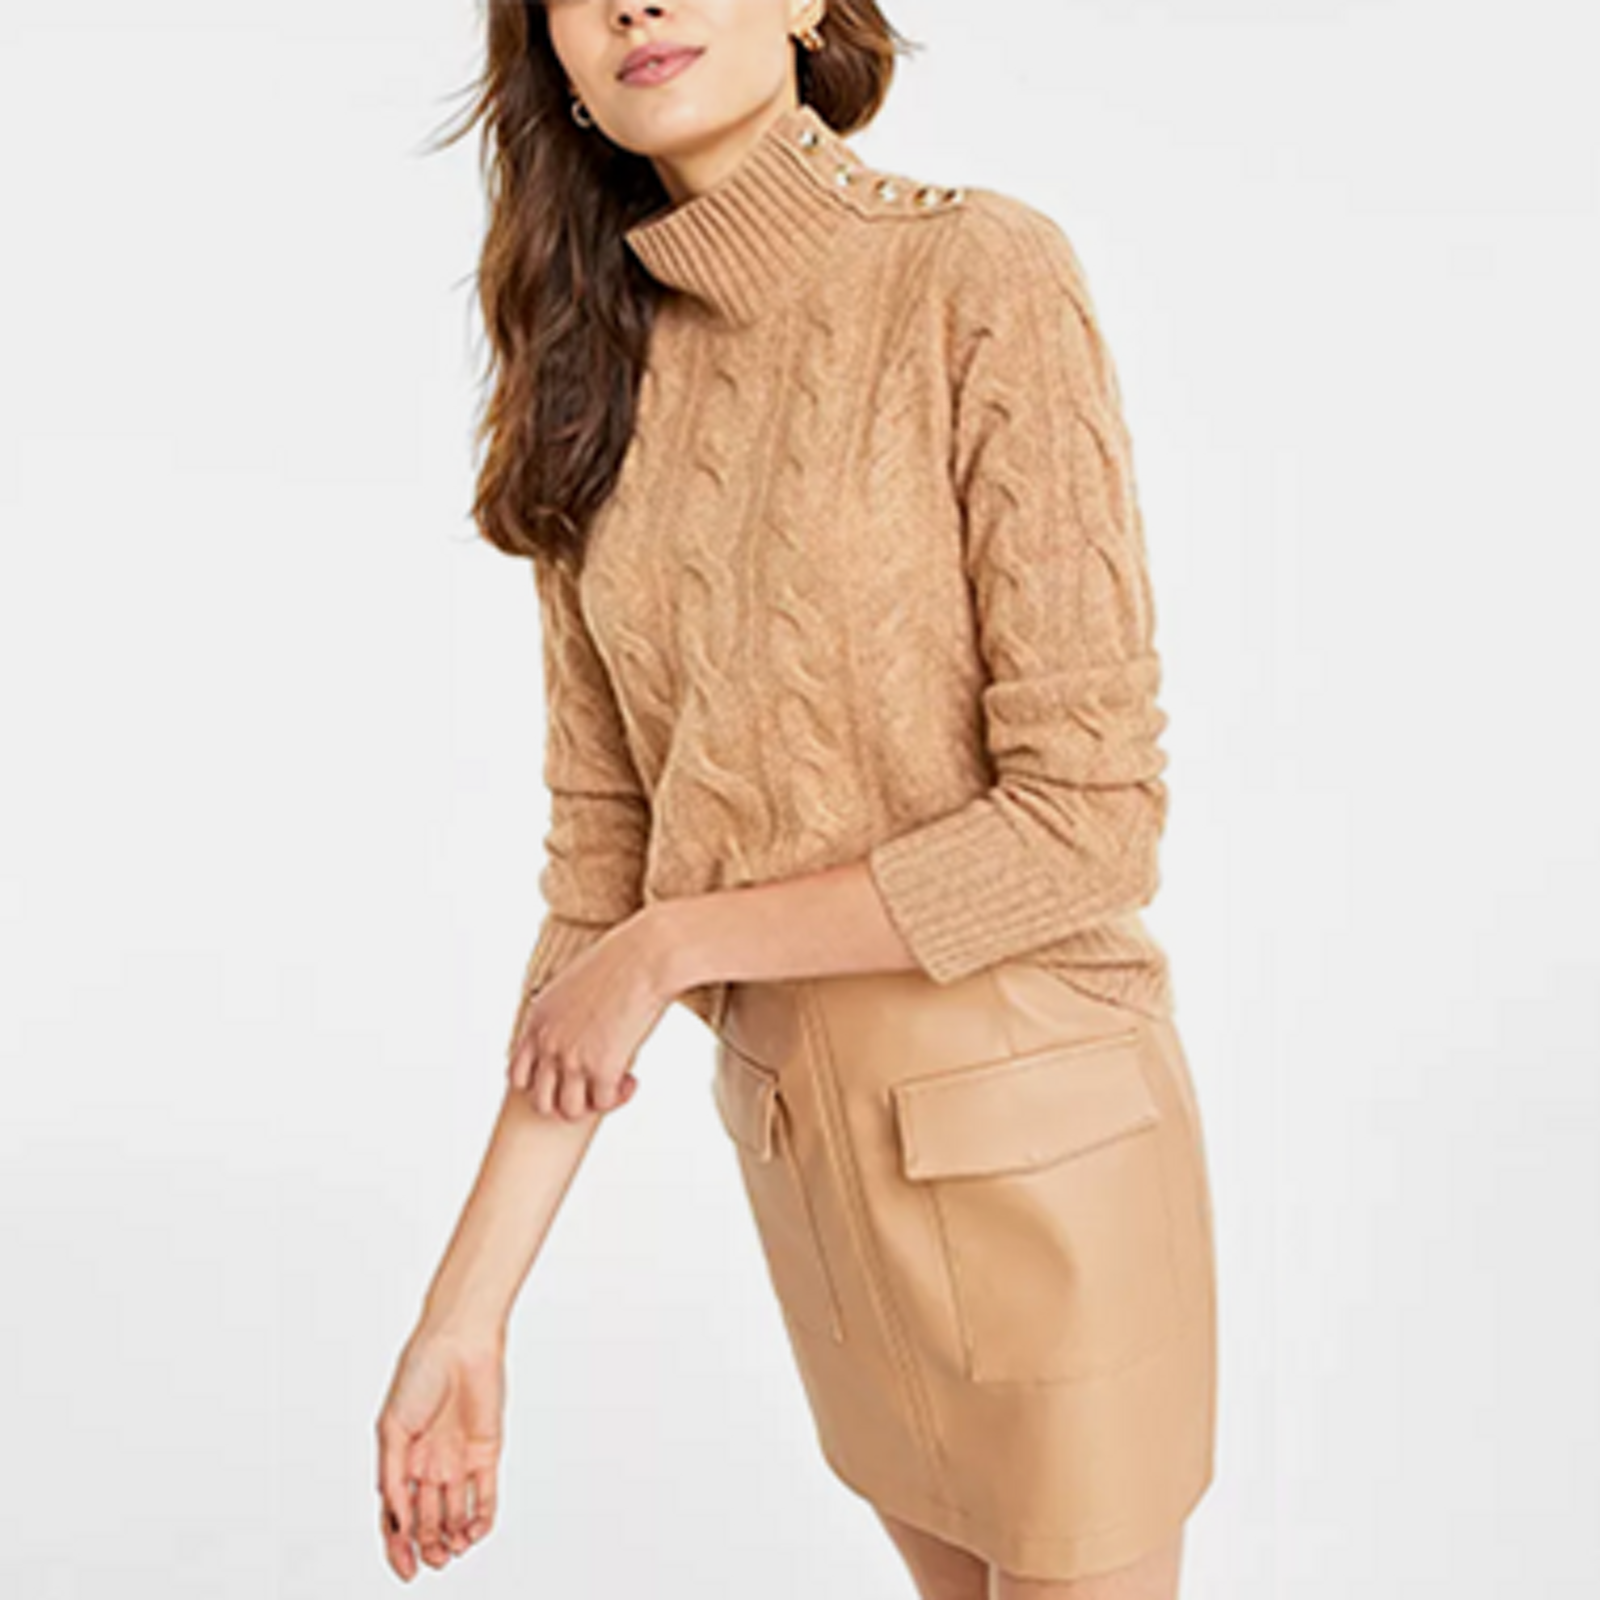 Free People Pink Women's Clothing Sale & Clearance - Macy's